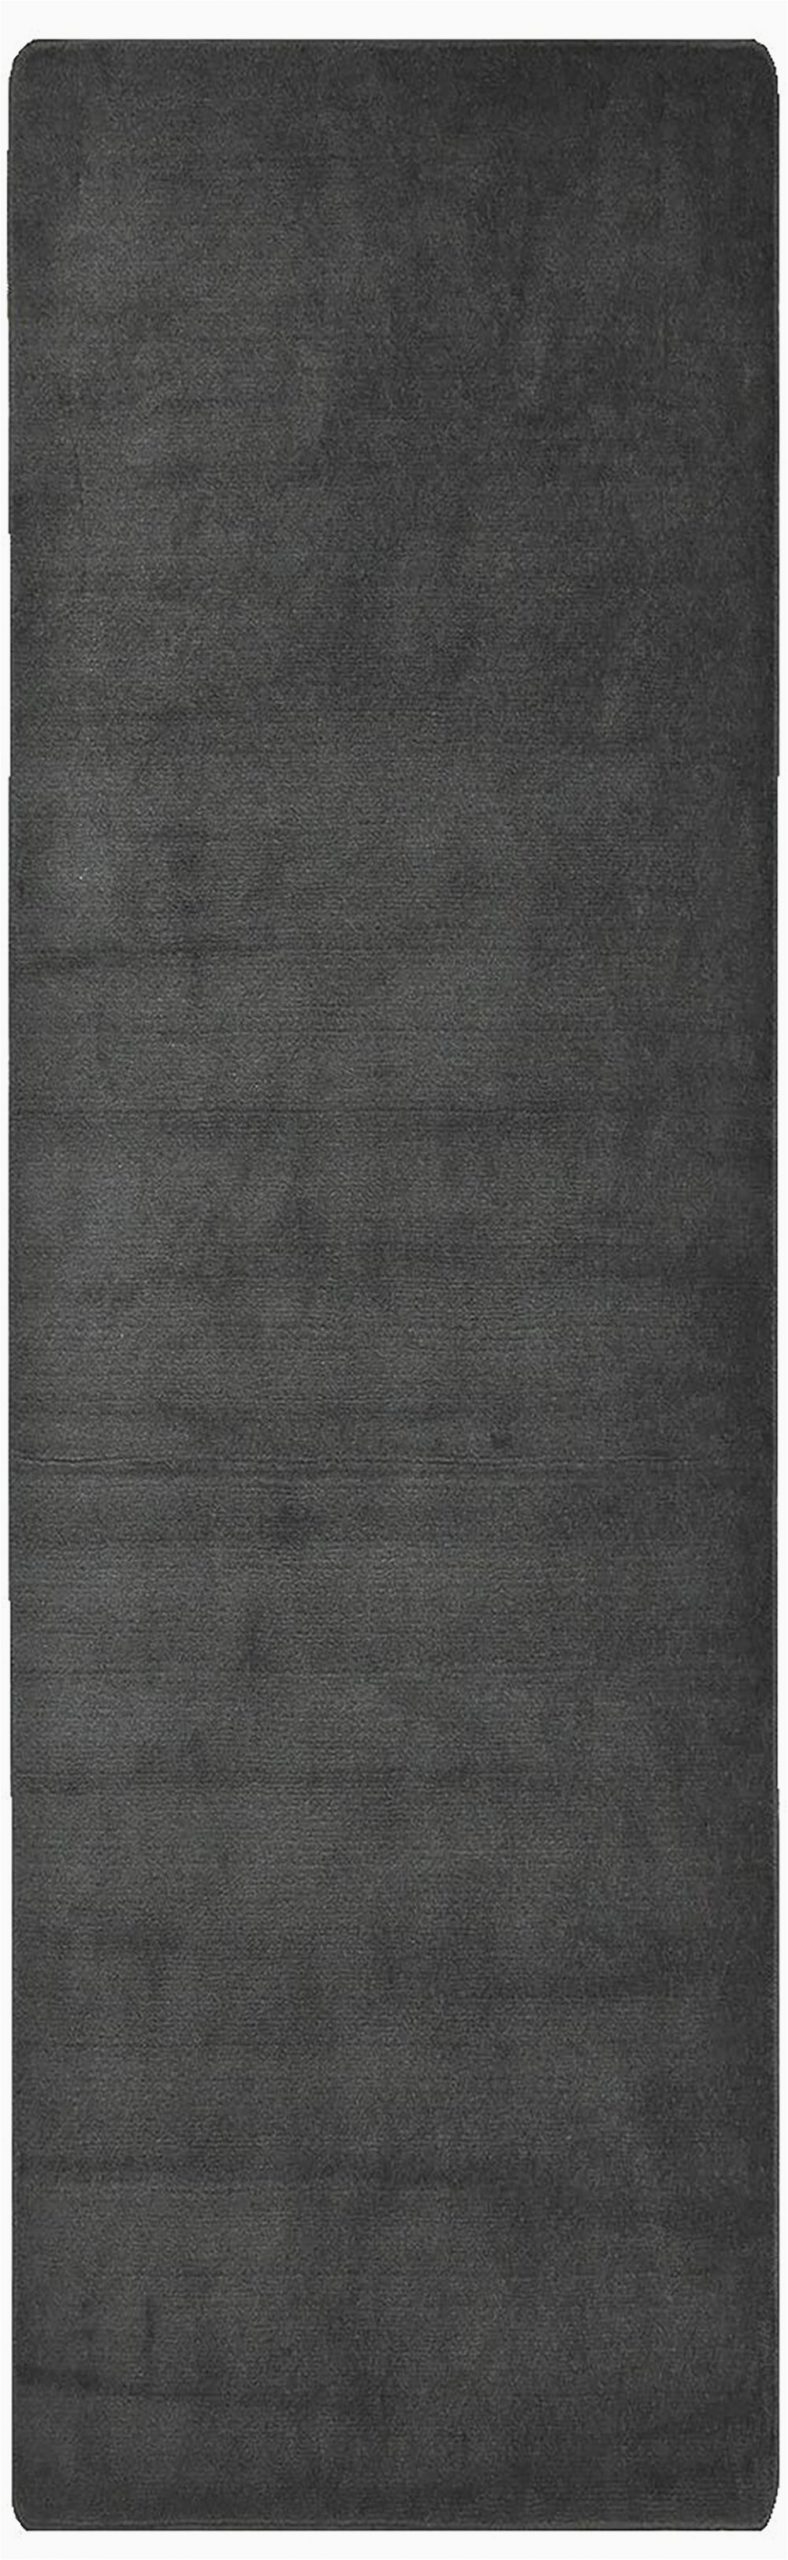 Rubber Backed area Rugs 4×6 Piedmt solid Slip Skid Resistant Rubber Back Gray area Rug